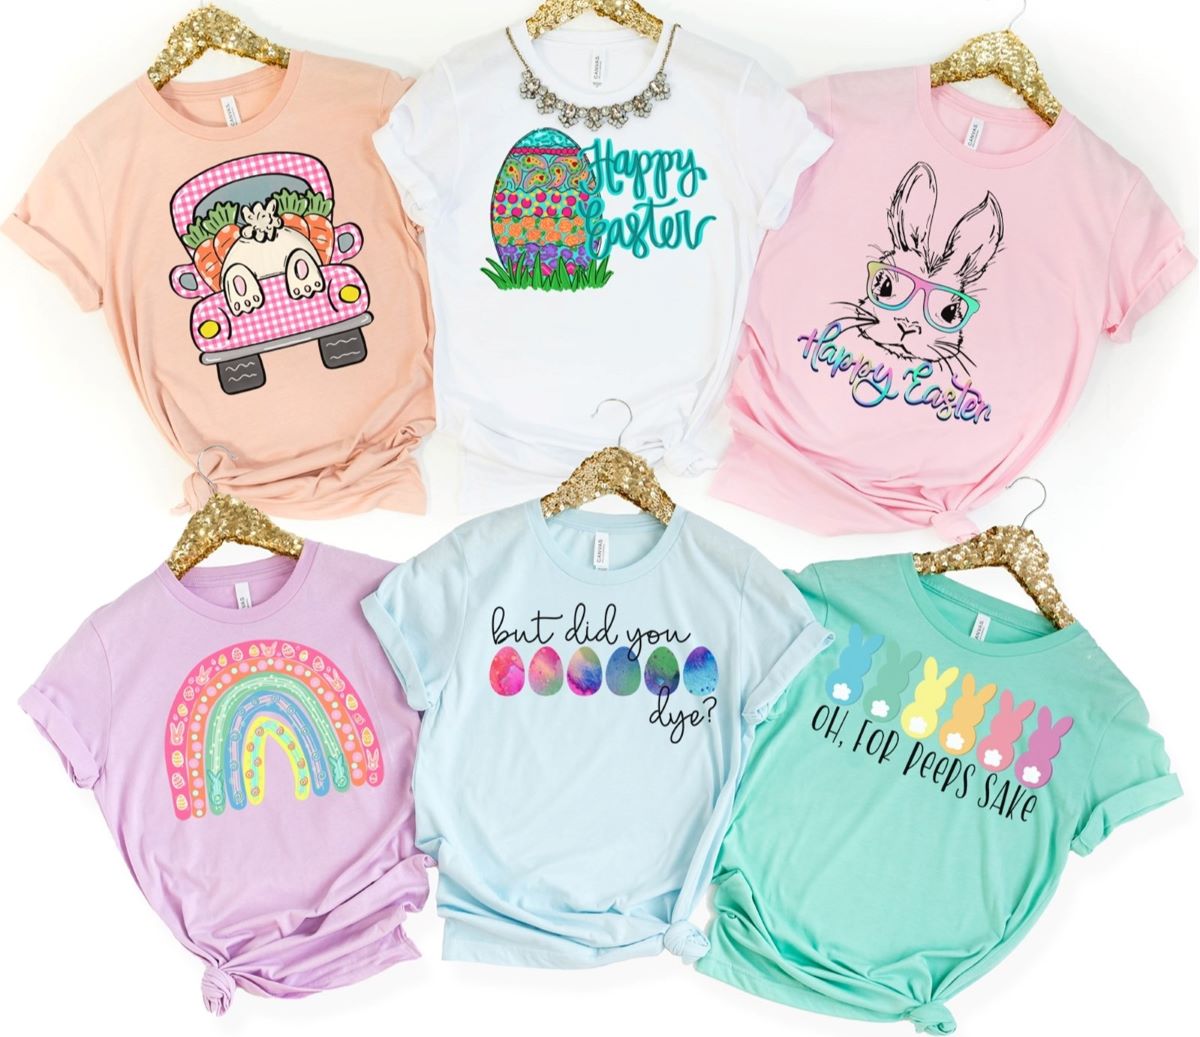 Easter Tees for the Whole Family from 17.99 Shipped on